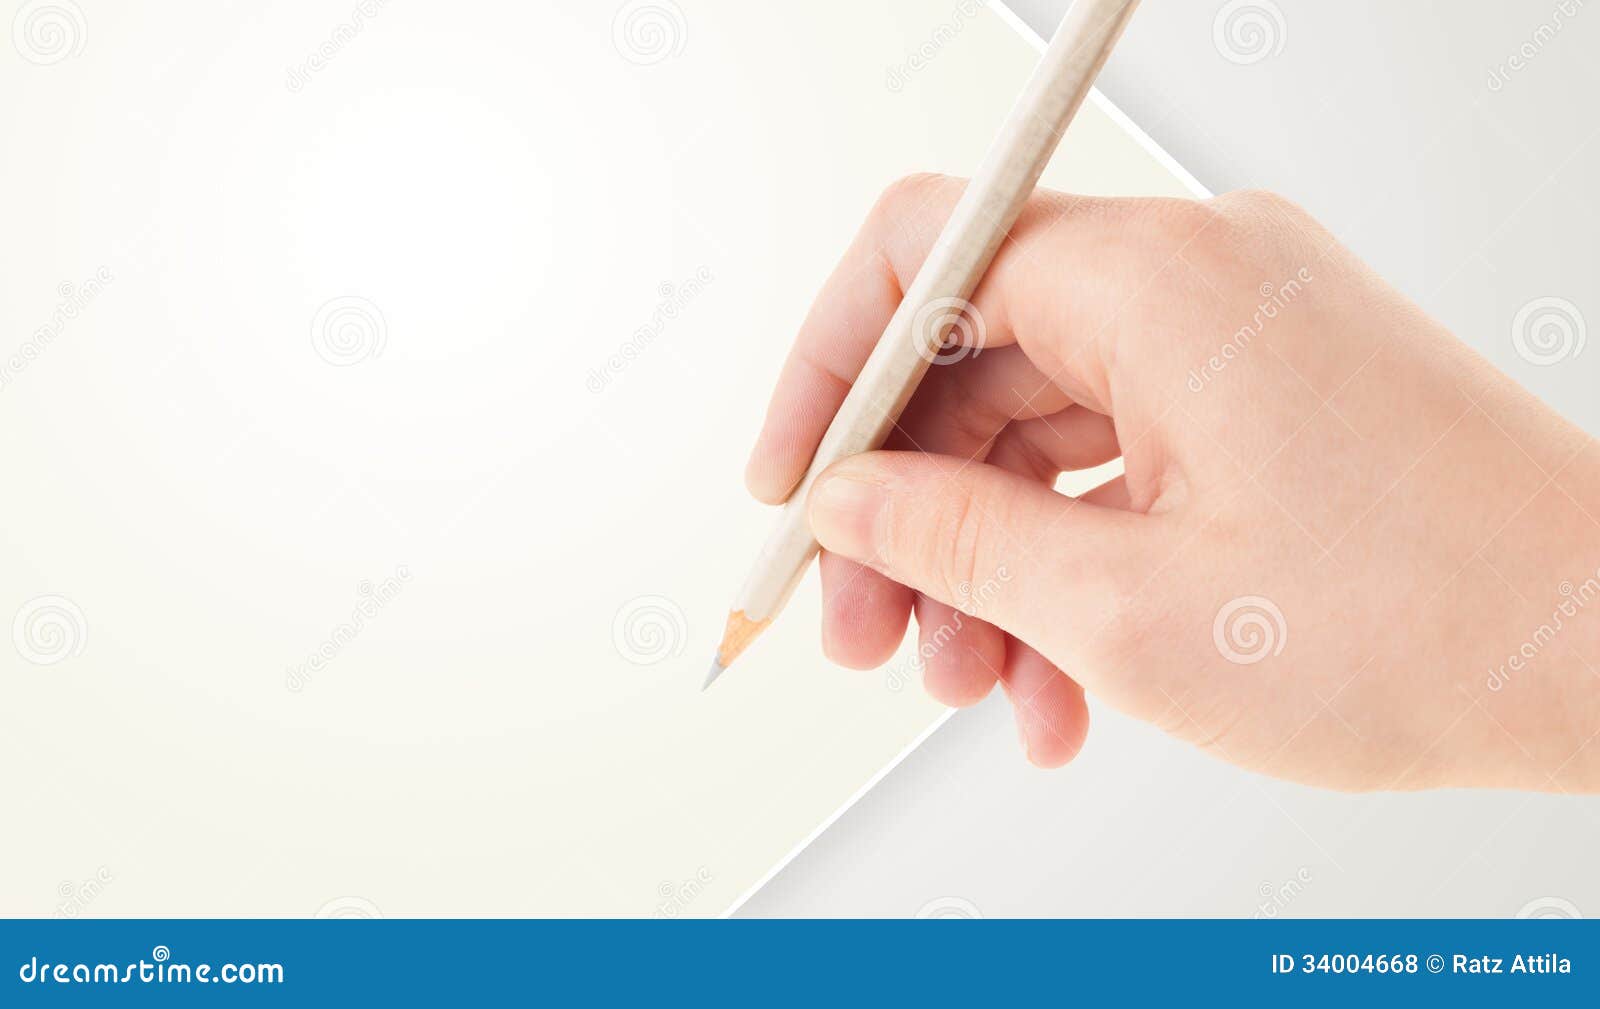 Human Hand Drawing with Pencil on Empty Paper Template Stock Photo ...